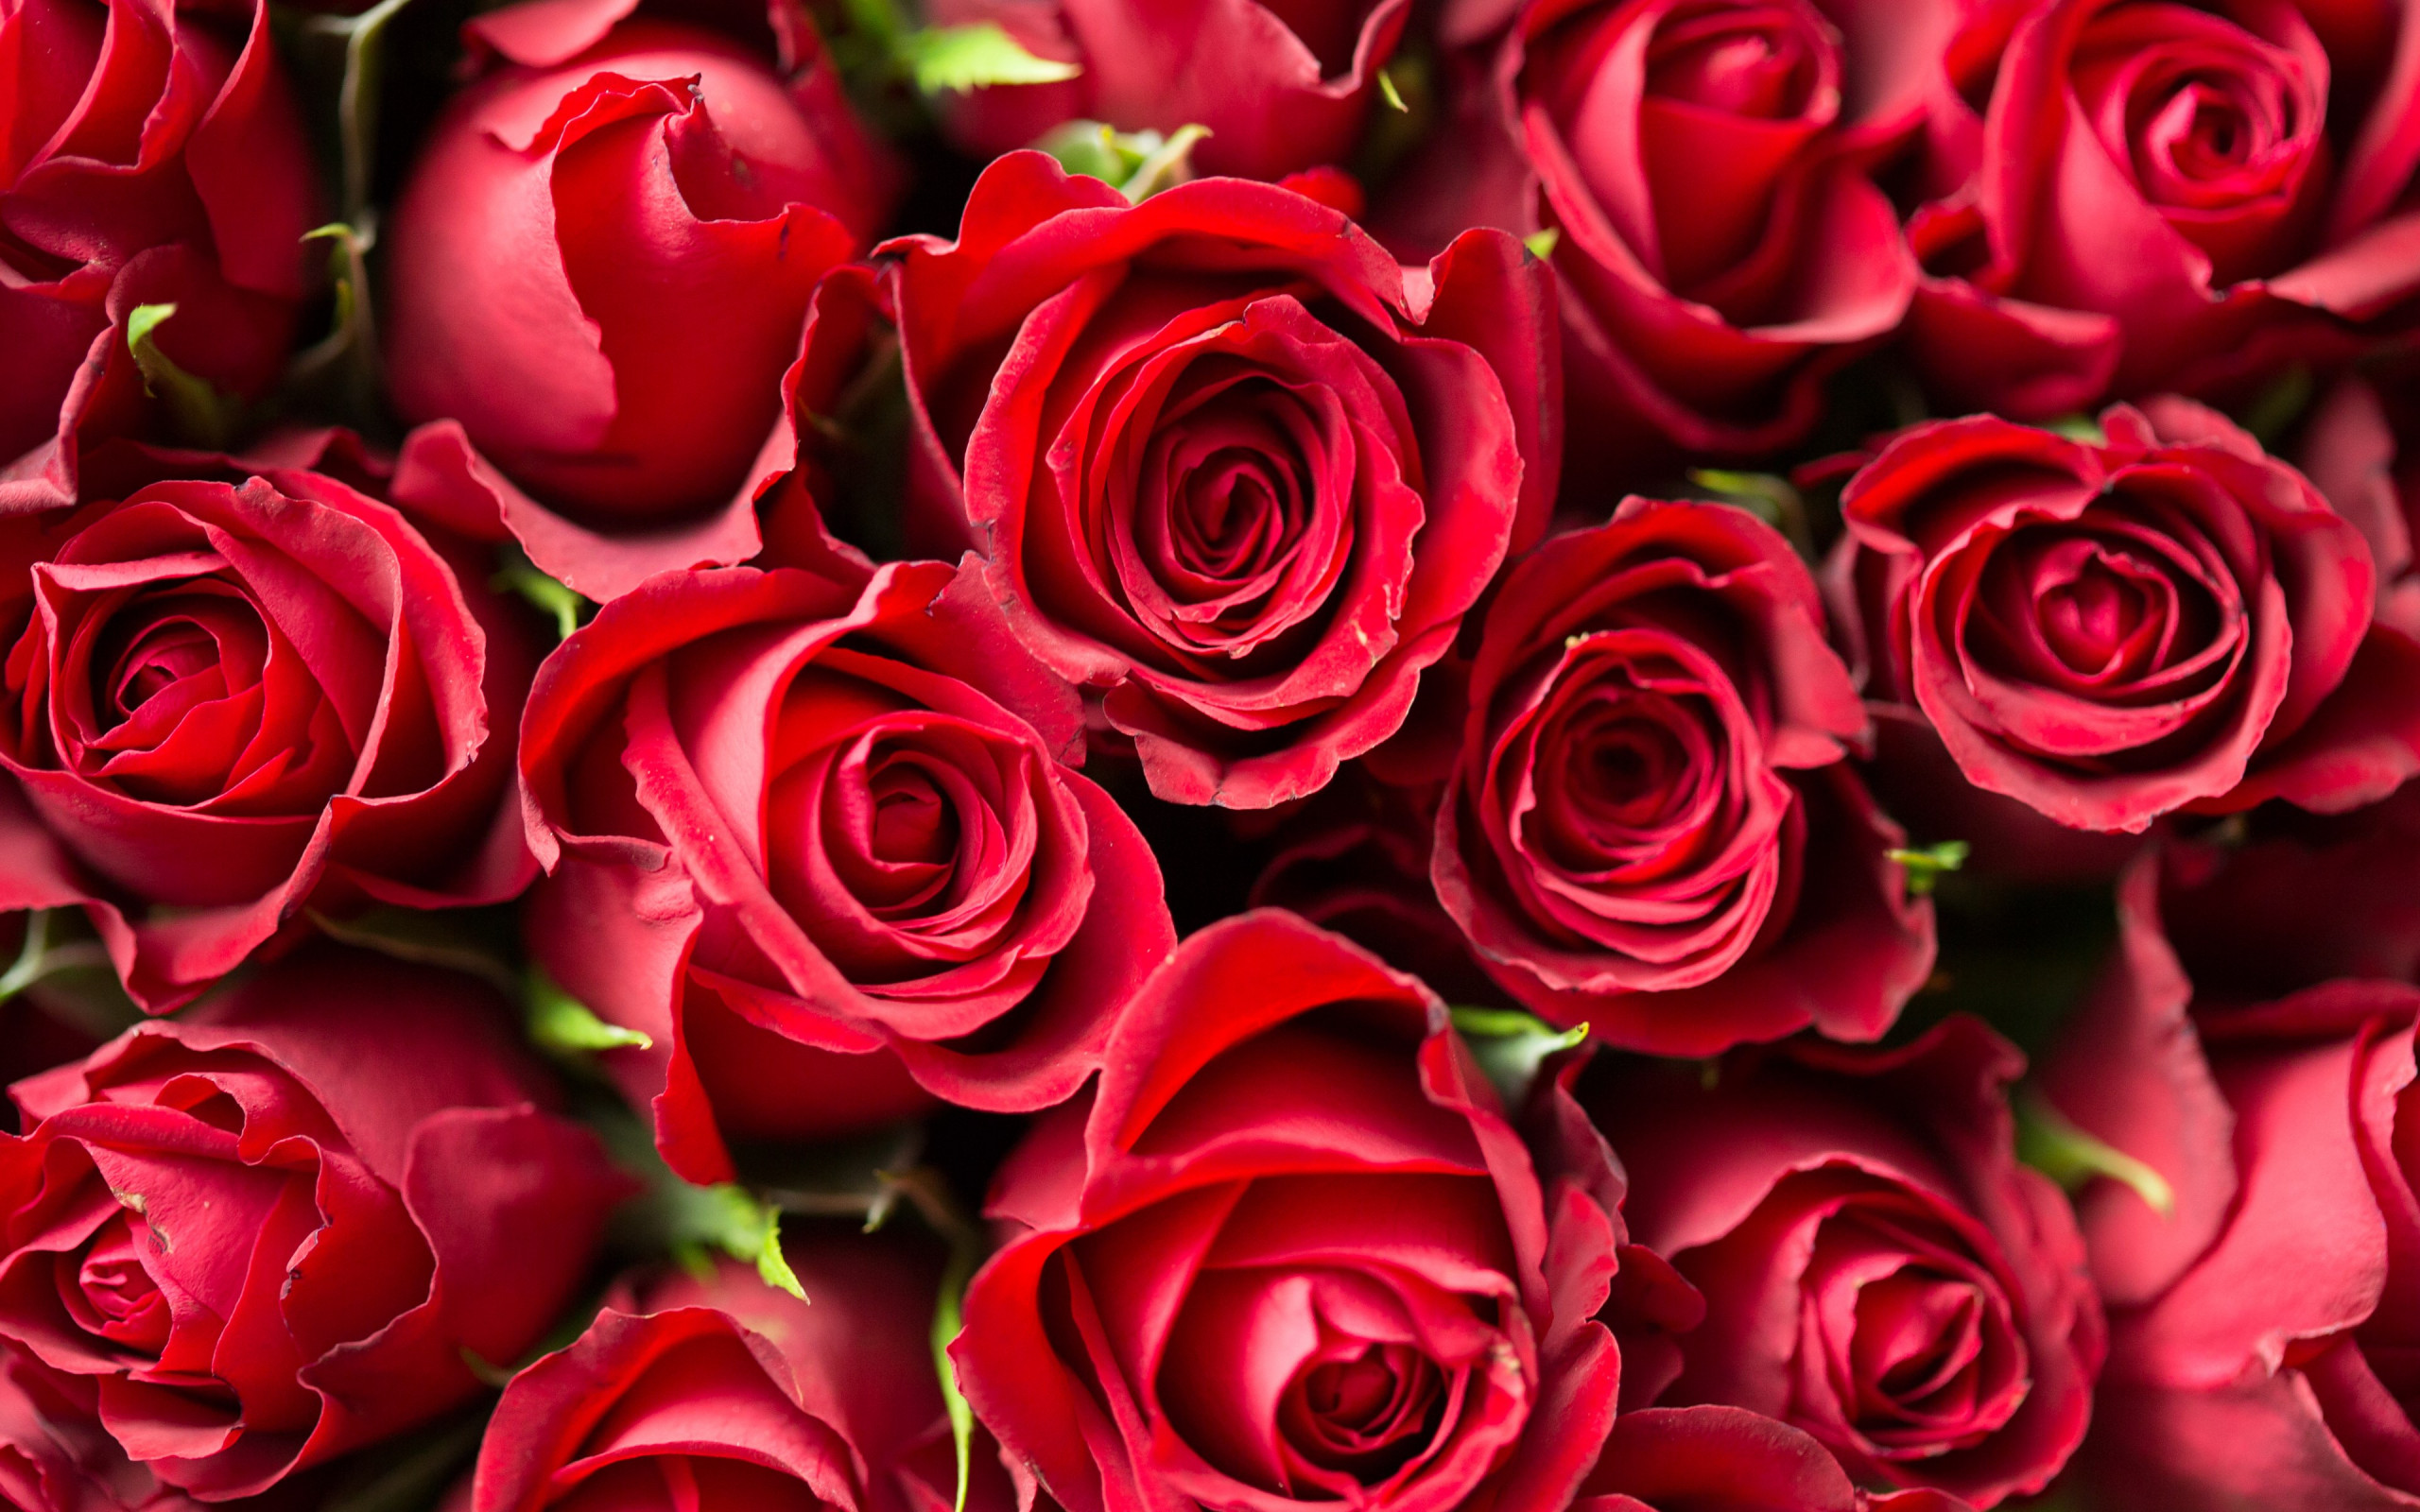 Lots of red roses wallpaper 2560x1600